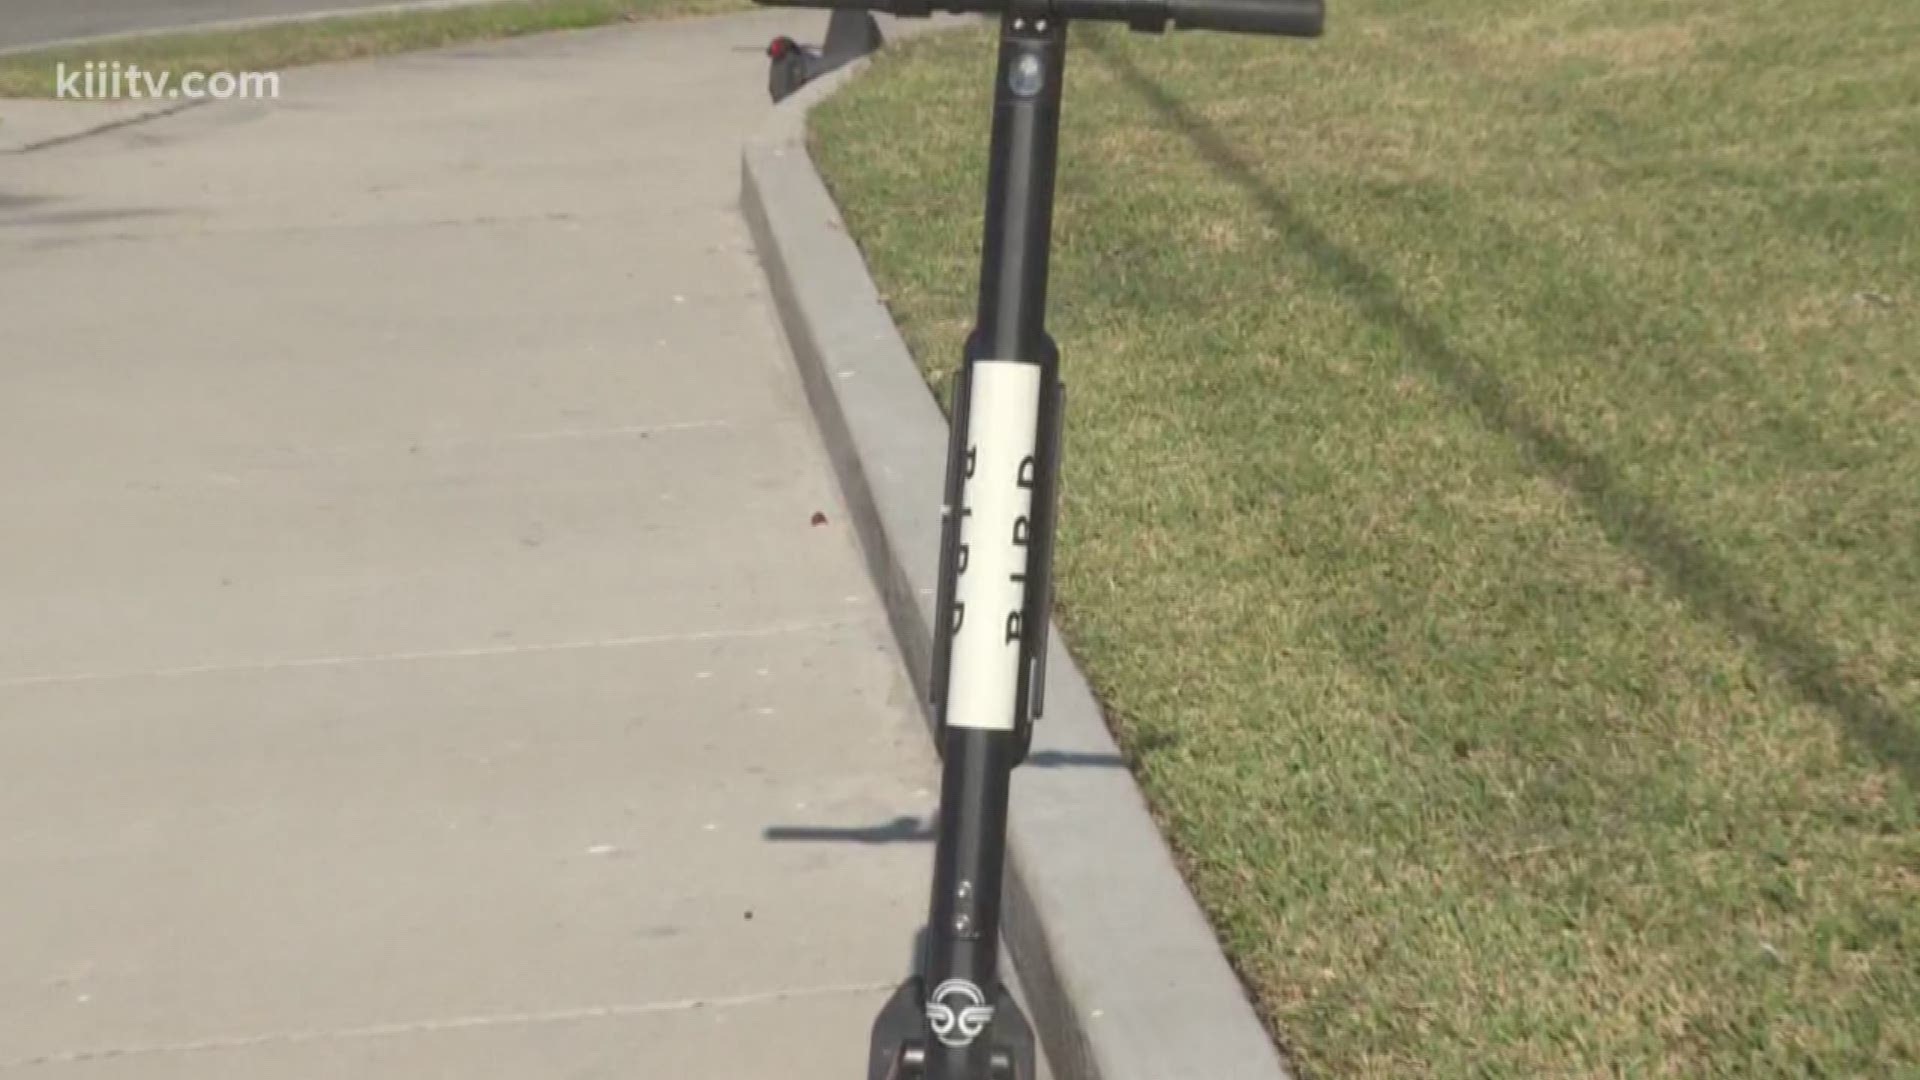 Bird, one of three popular scooter rental companies that came to Corpus Christi last year, has decided to move on.